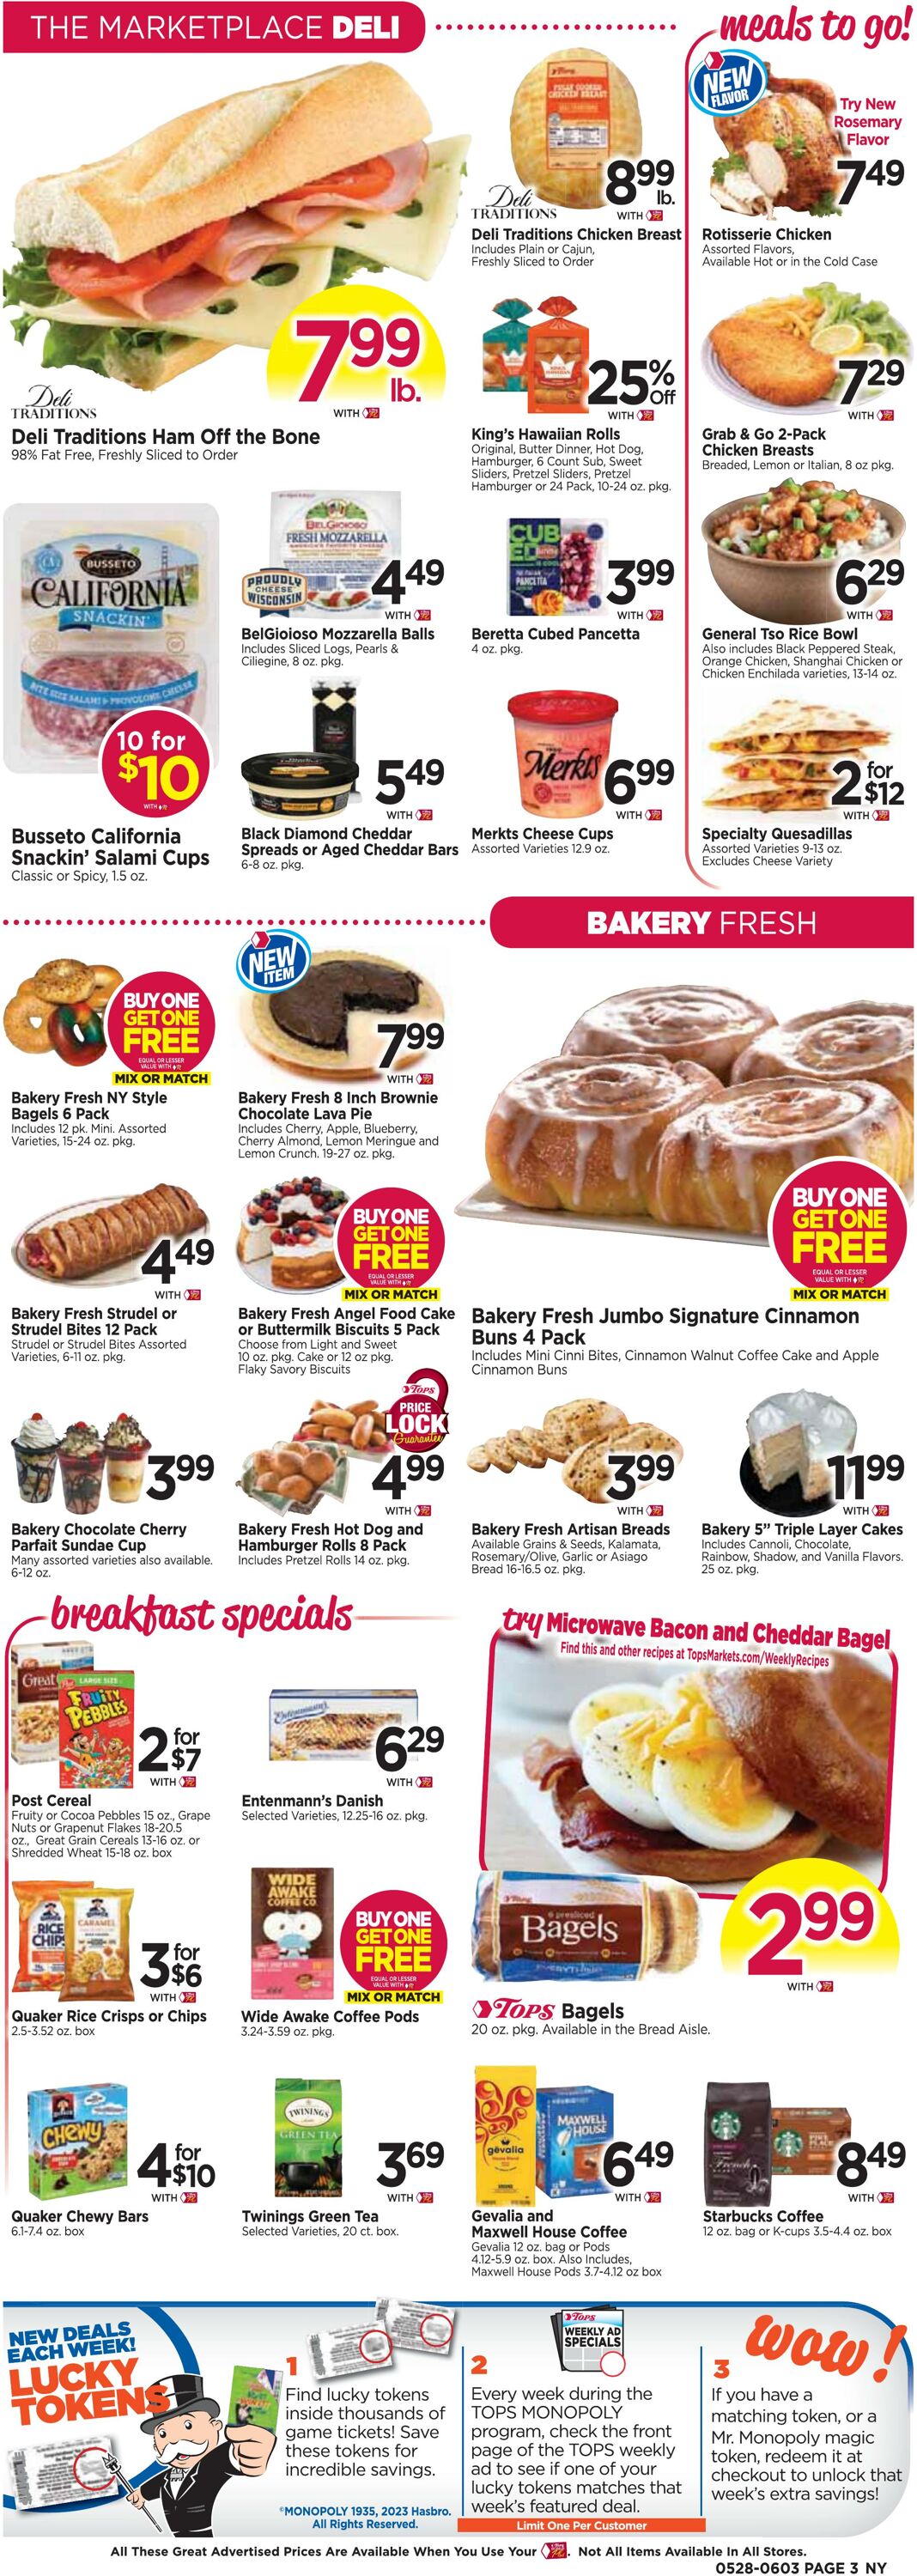 Weekly ad Tops Friendly Markets 05/28/2023 - 06/03/2023